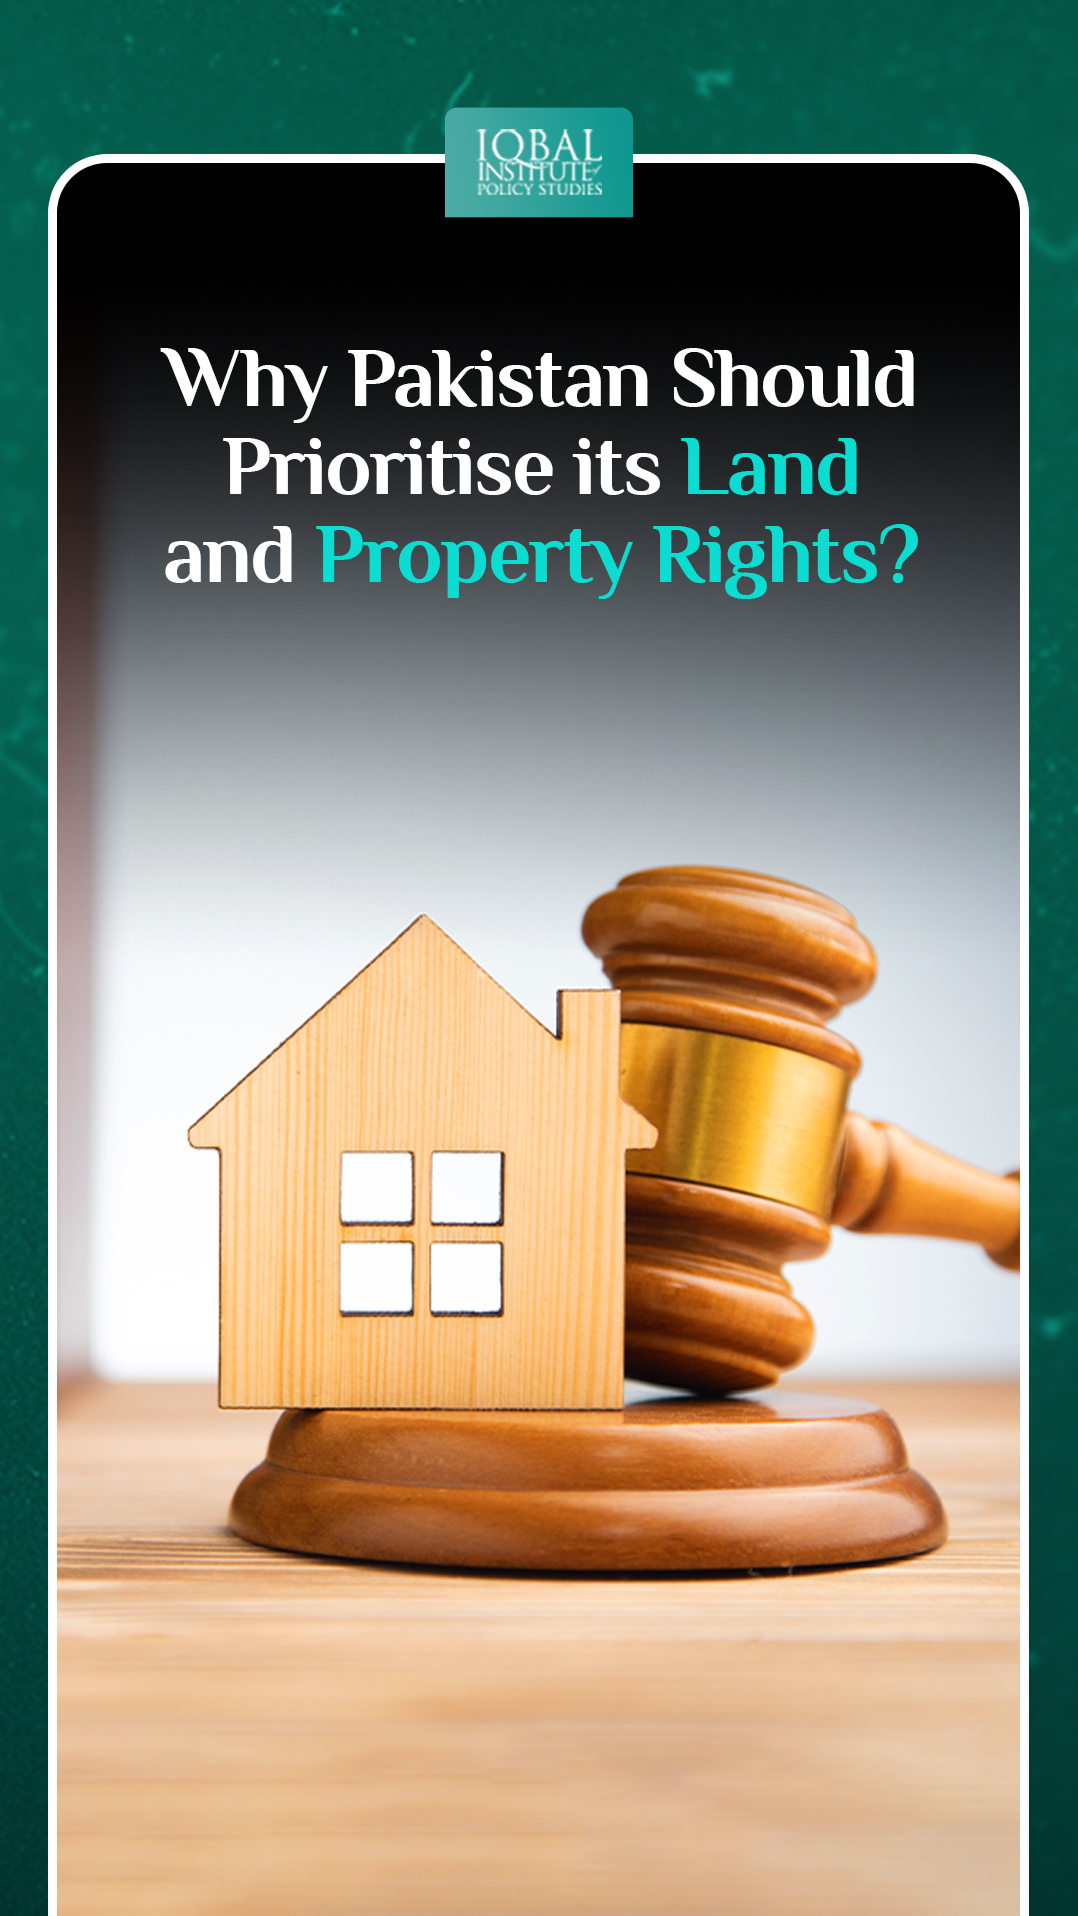 Why Should Pakistan Prioritise Its Land and Property Rights?